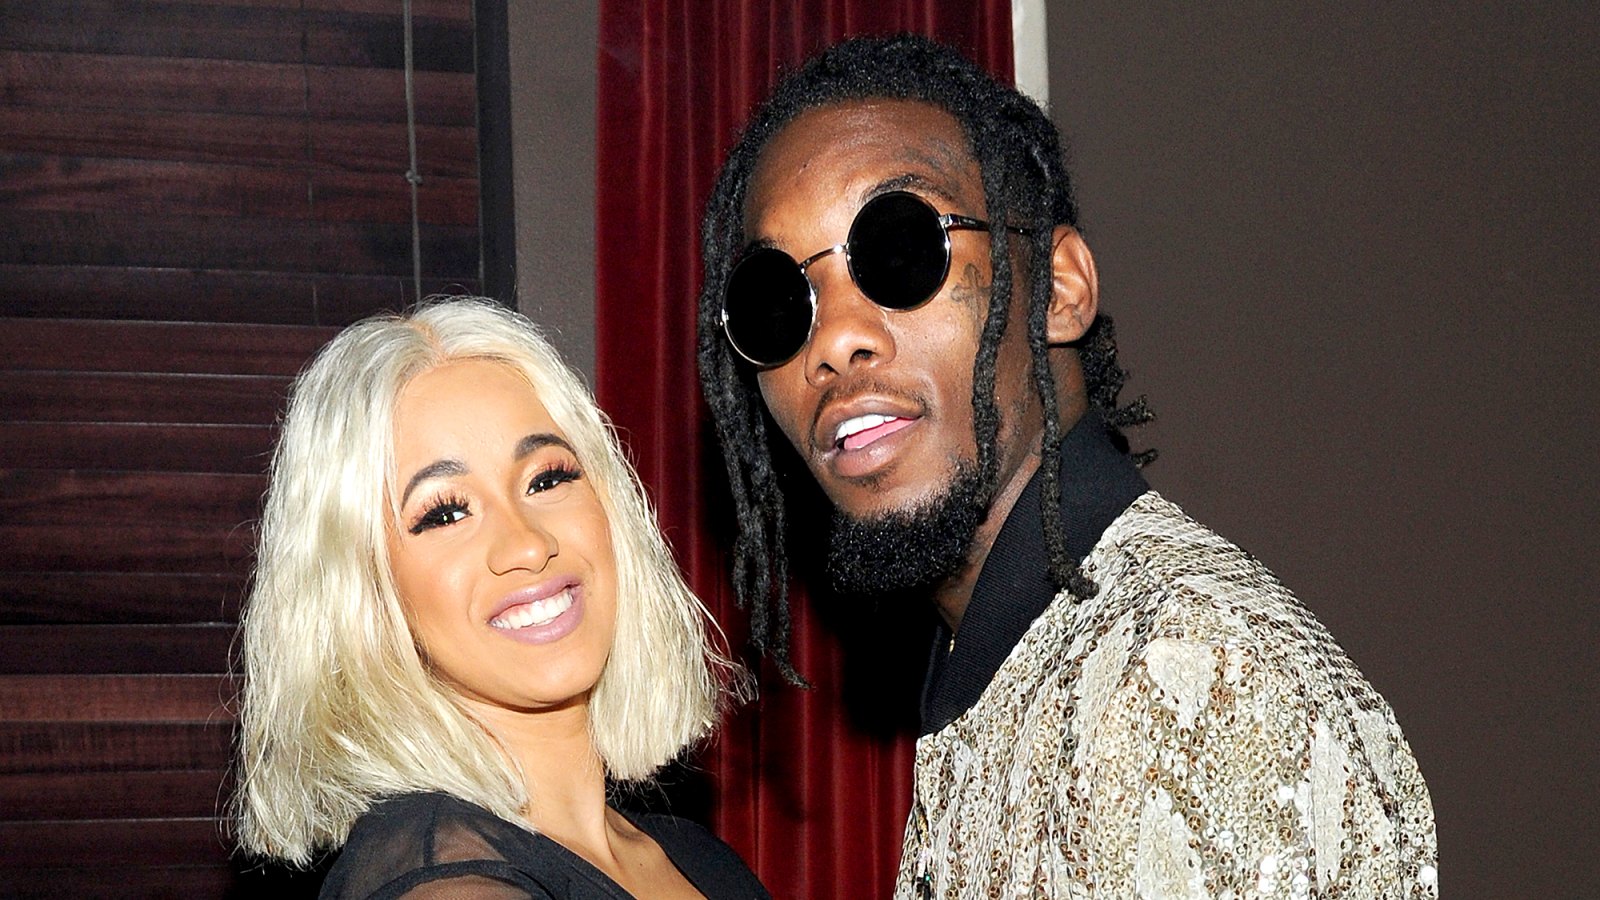 Cardi B and Offset attend NYLON's Rebel Fashion Party at Gramercy Park Hotel on September 12, 2017 in New York City.